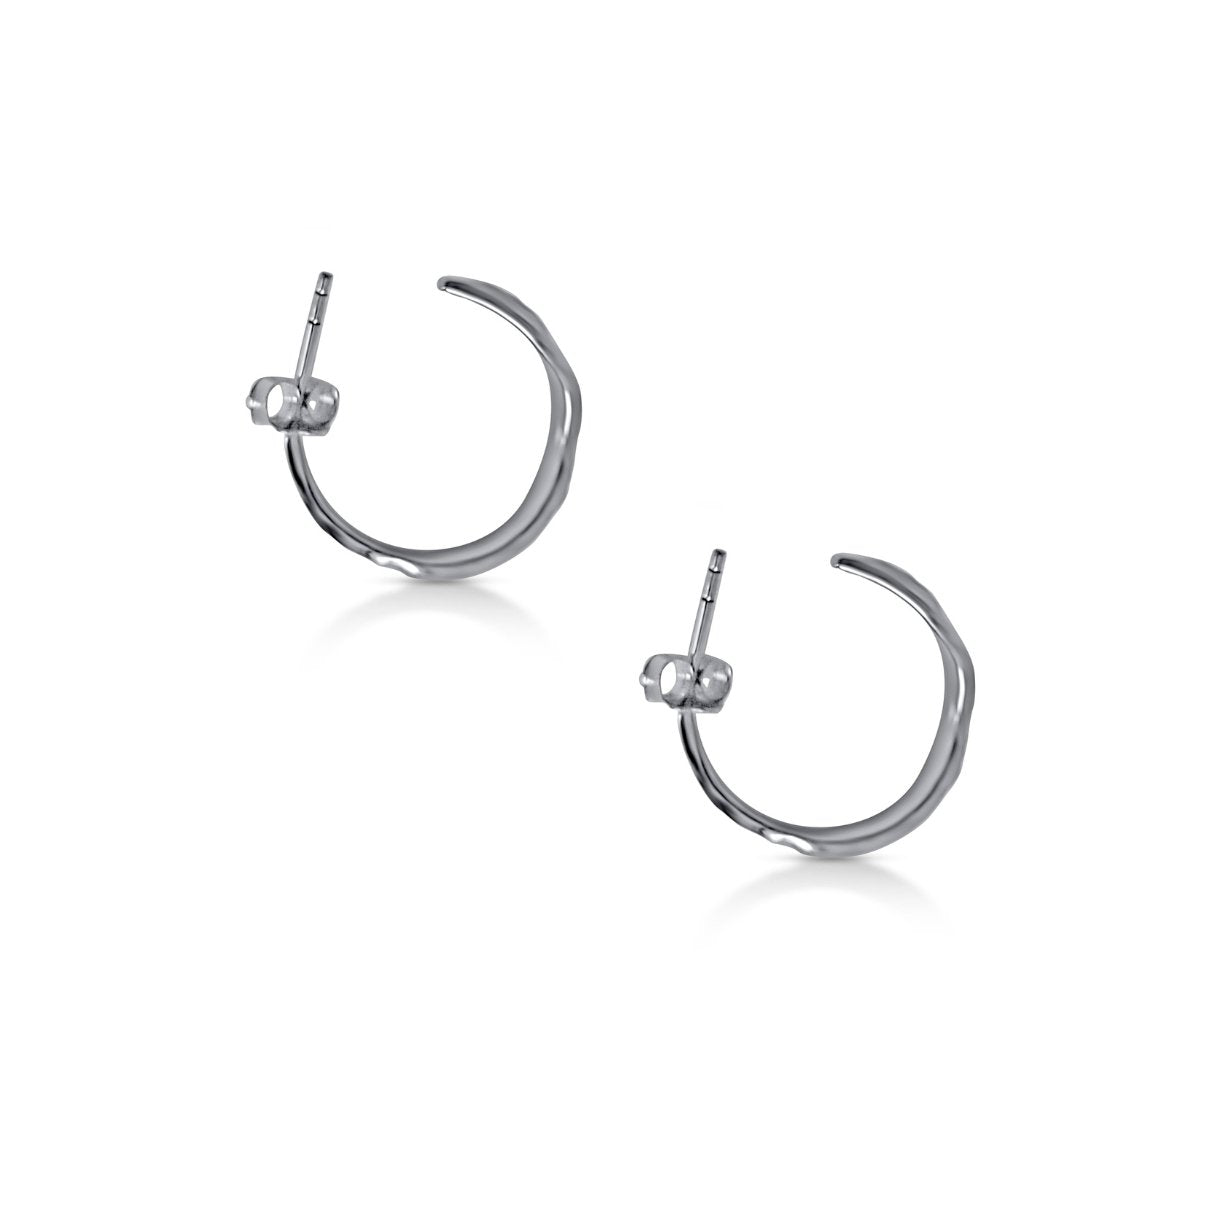 modern natural wood textured silver hoop earrings with sterling post and backings